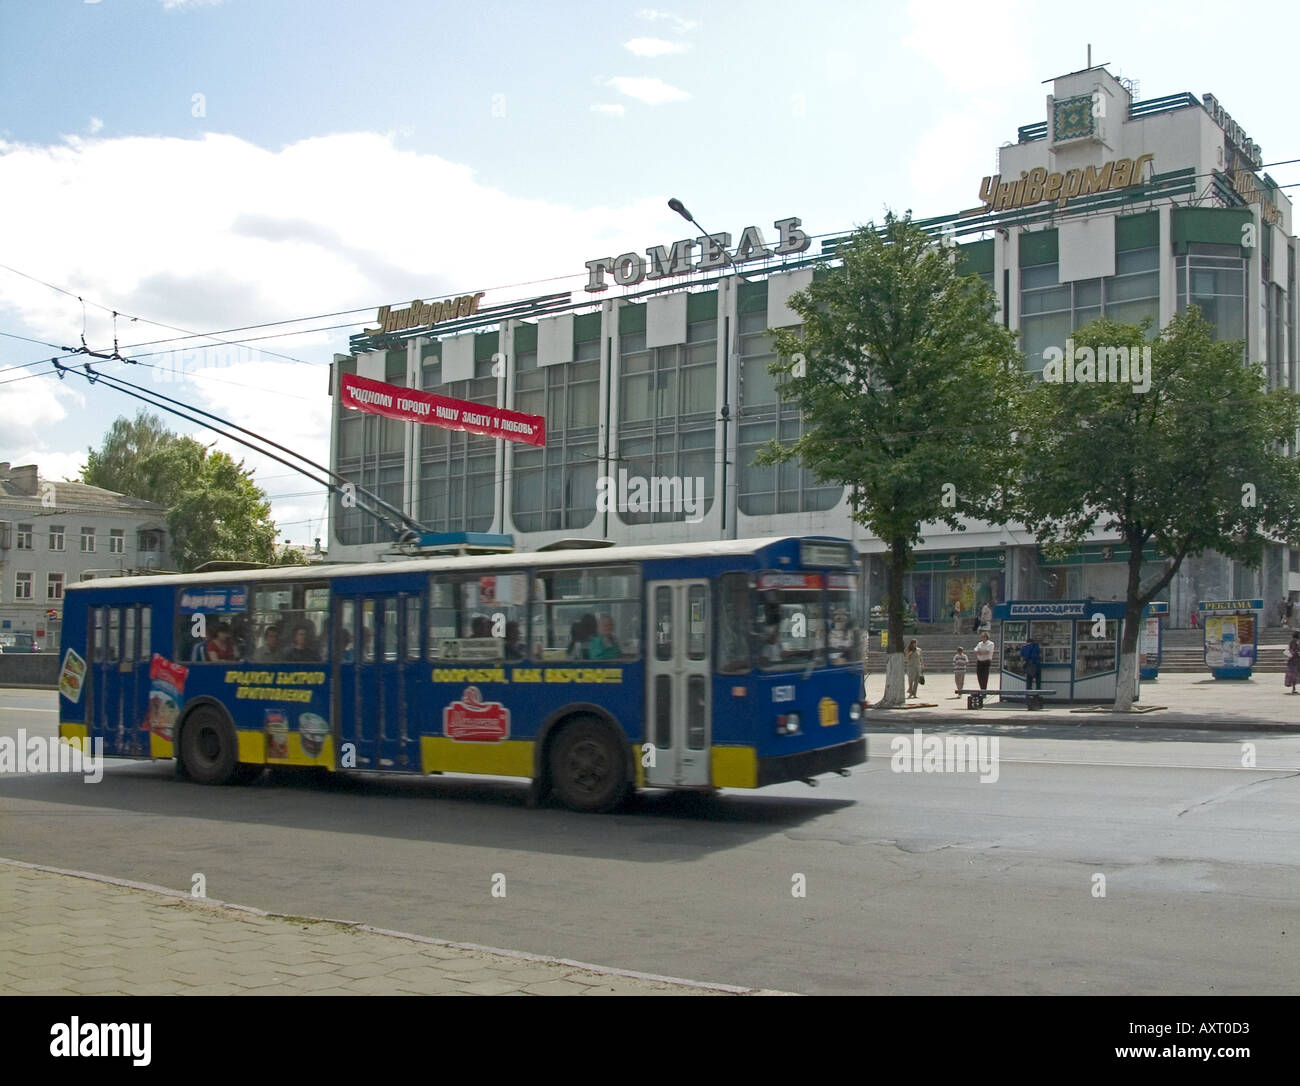 Trolleybus with spring-loaded trolley poles connecting with overhead wires in transit opposite Gomel shopping mall, Sovetskaya Street, Gomel, Belarus Stock Photo